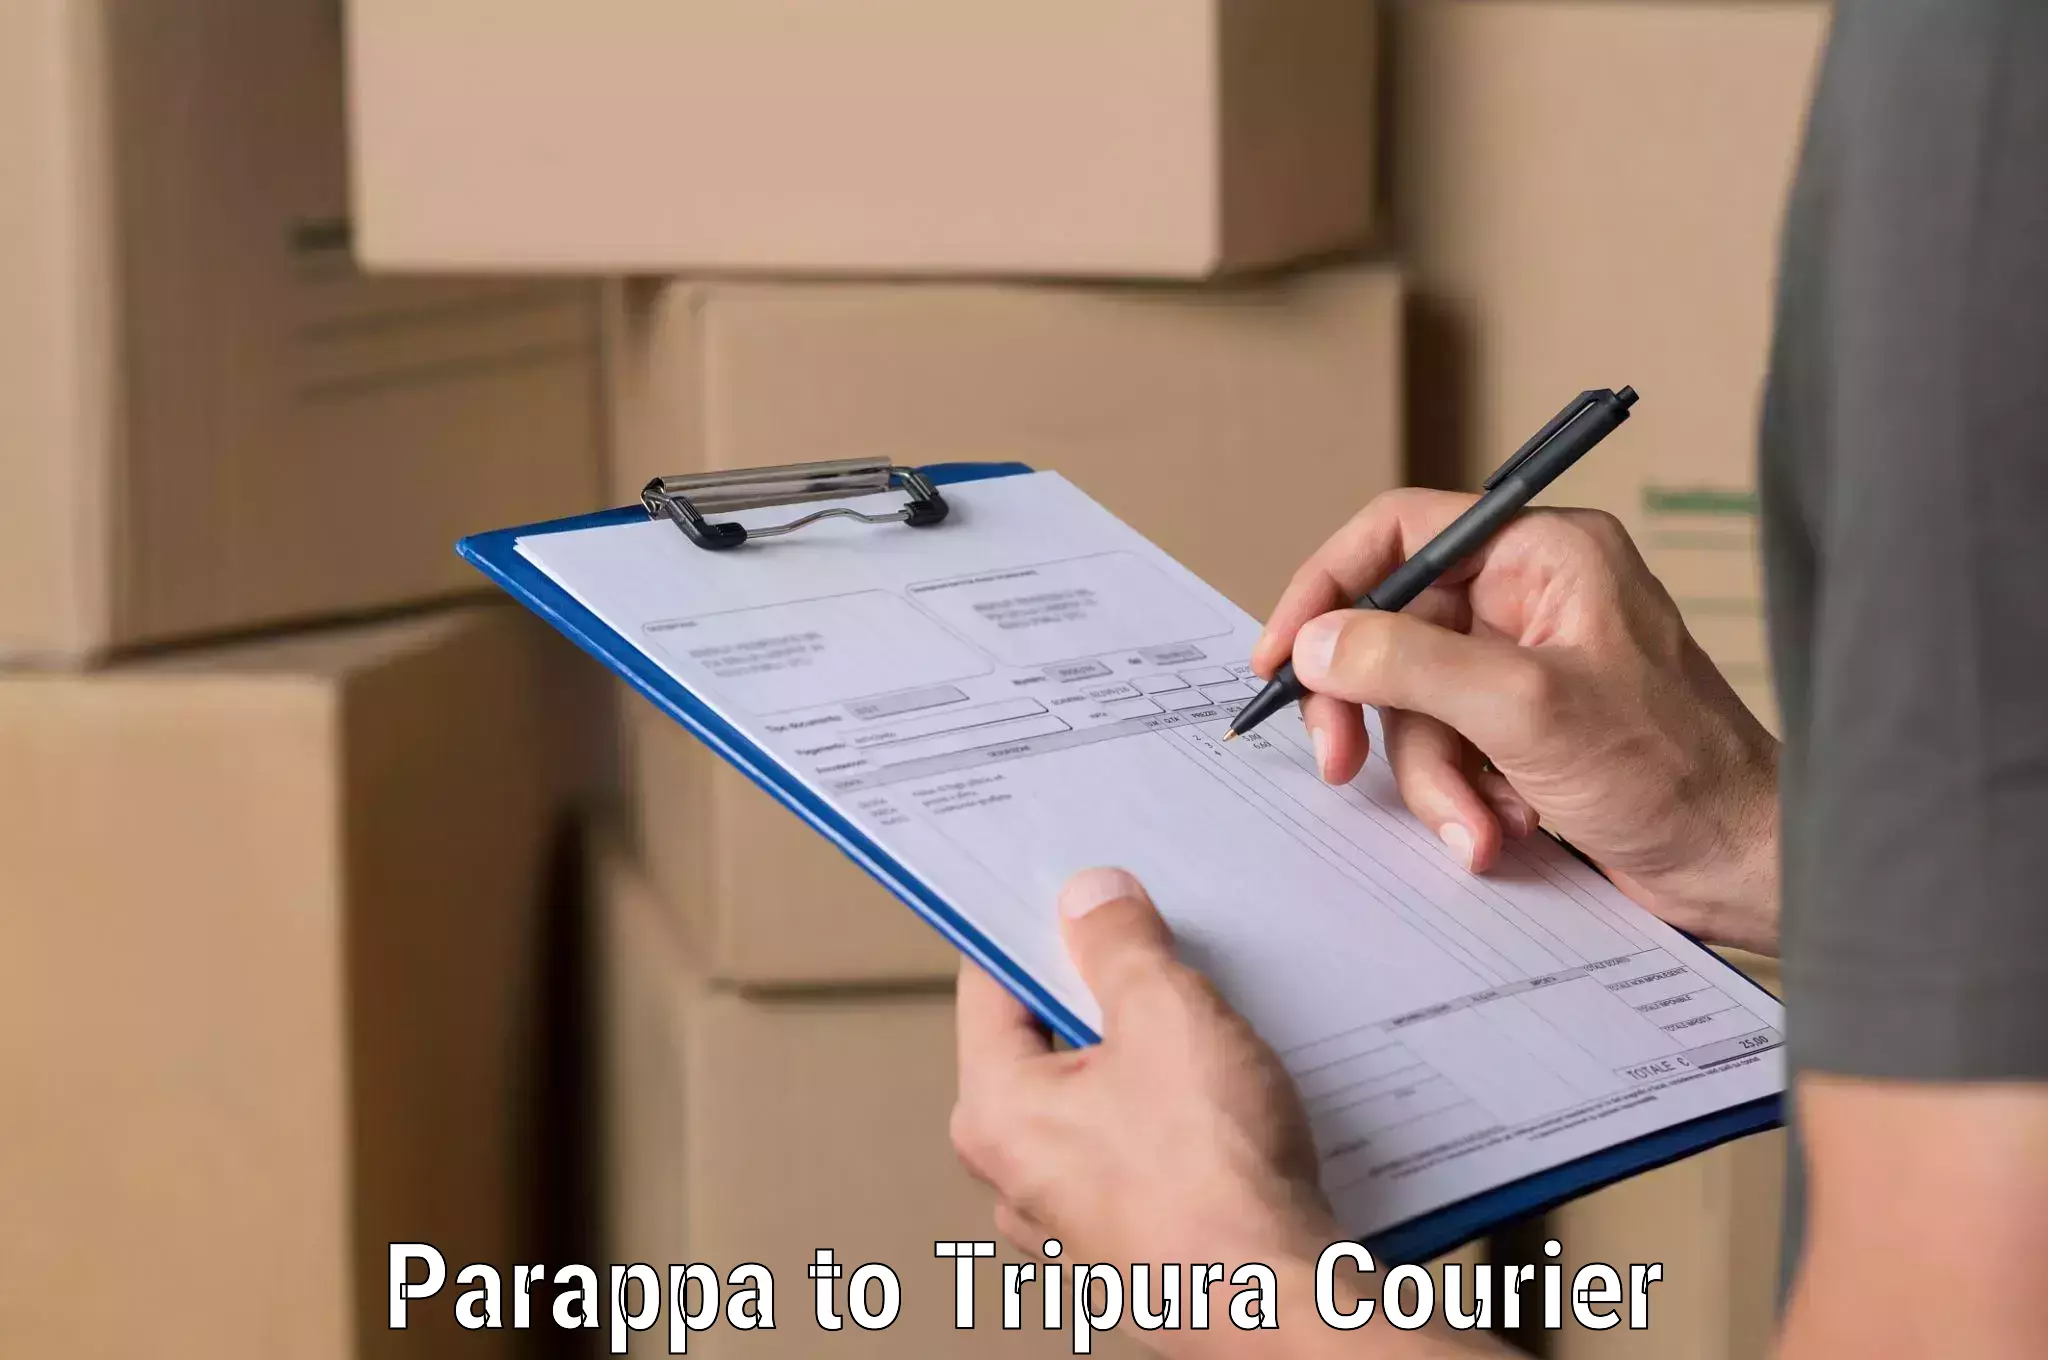 Efficient shipping operations Parappa to Udaipur Tripura